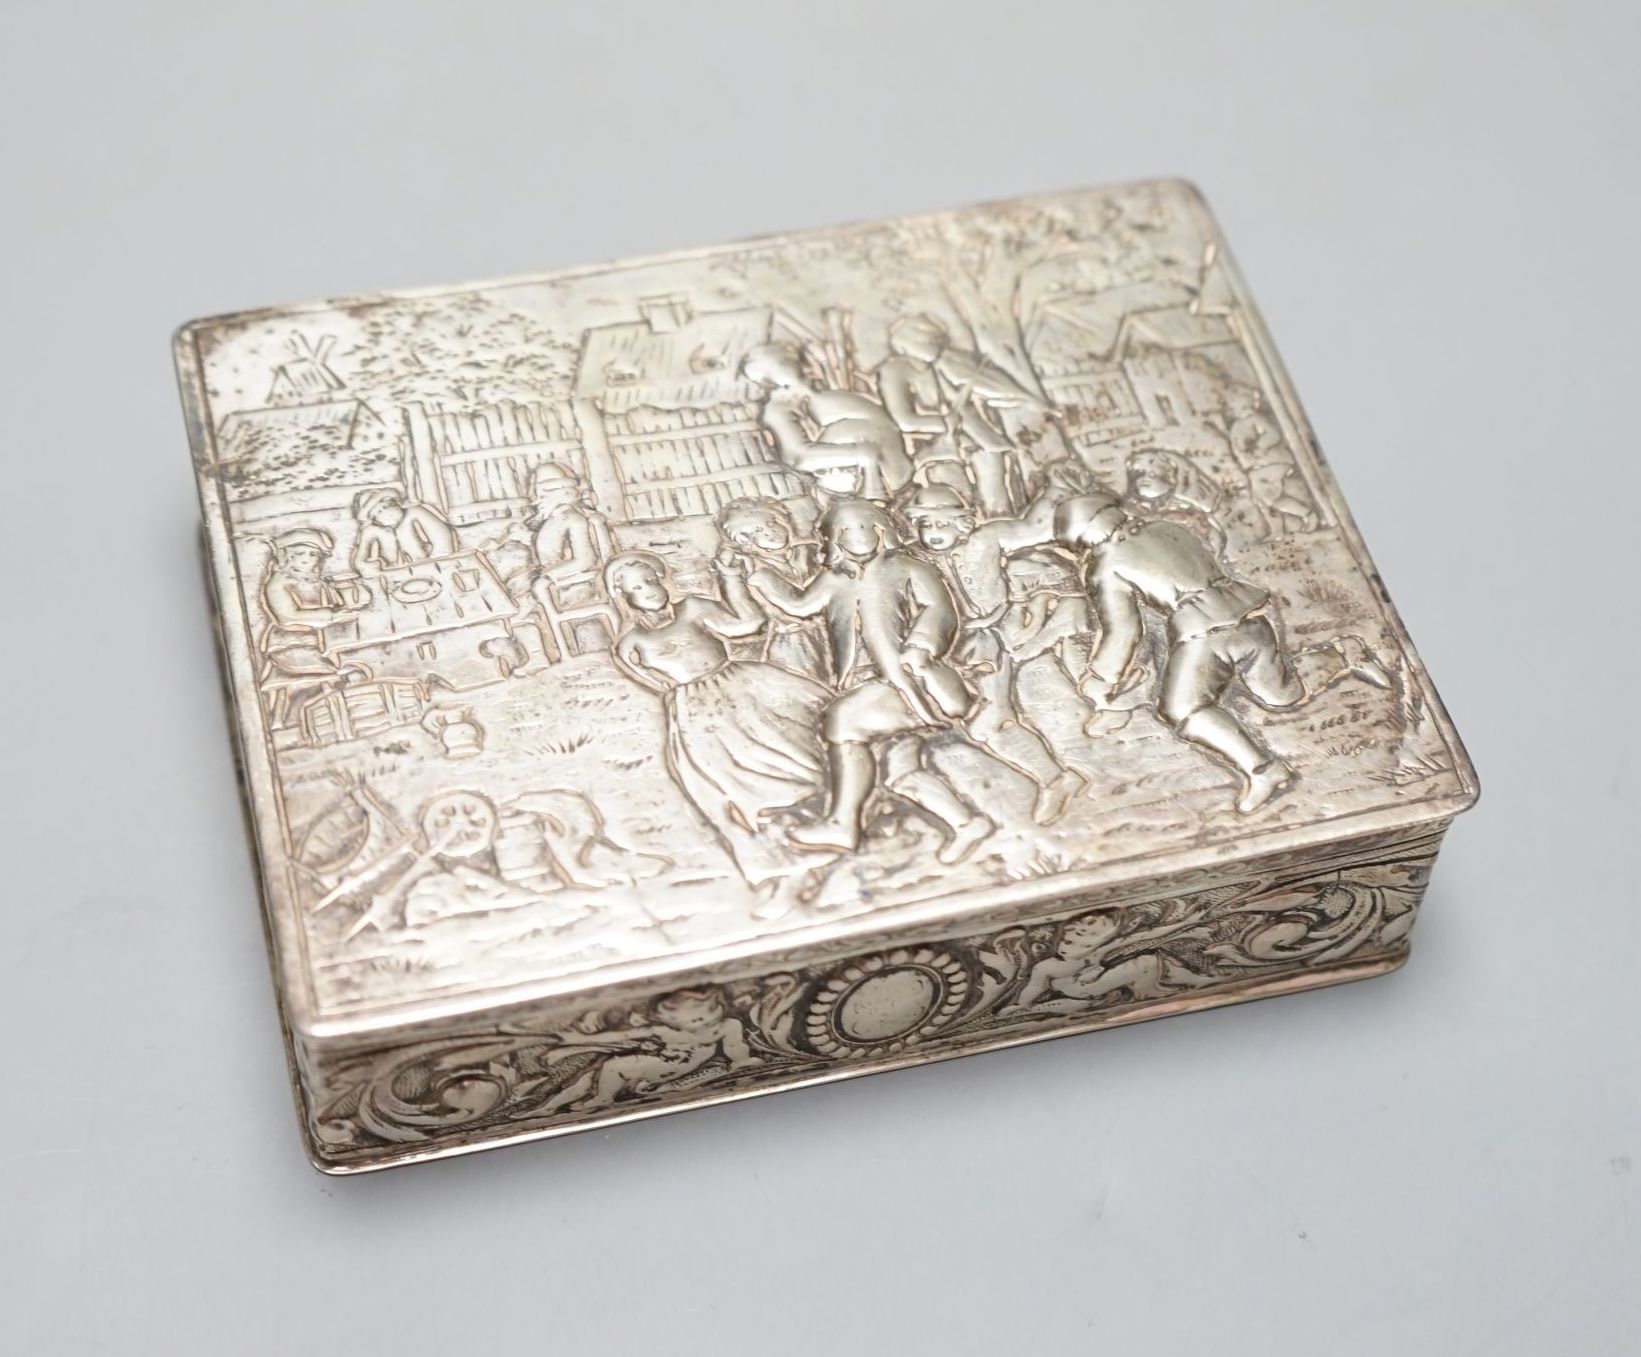 A late 19th / early 20th century German Hanau silver rectangular box and cover, the top embossed with a scene of revellers, import marks for London, 1912, 11.7cm.